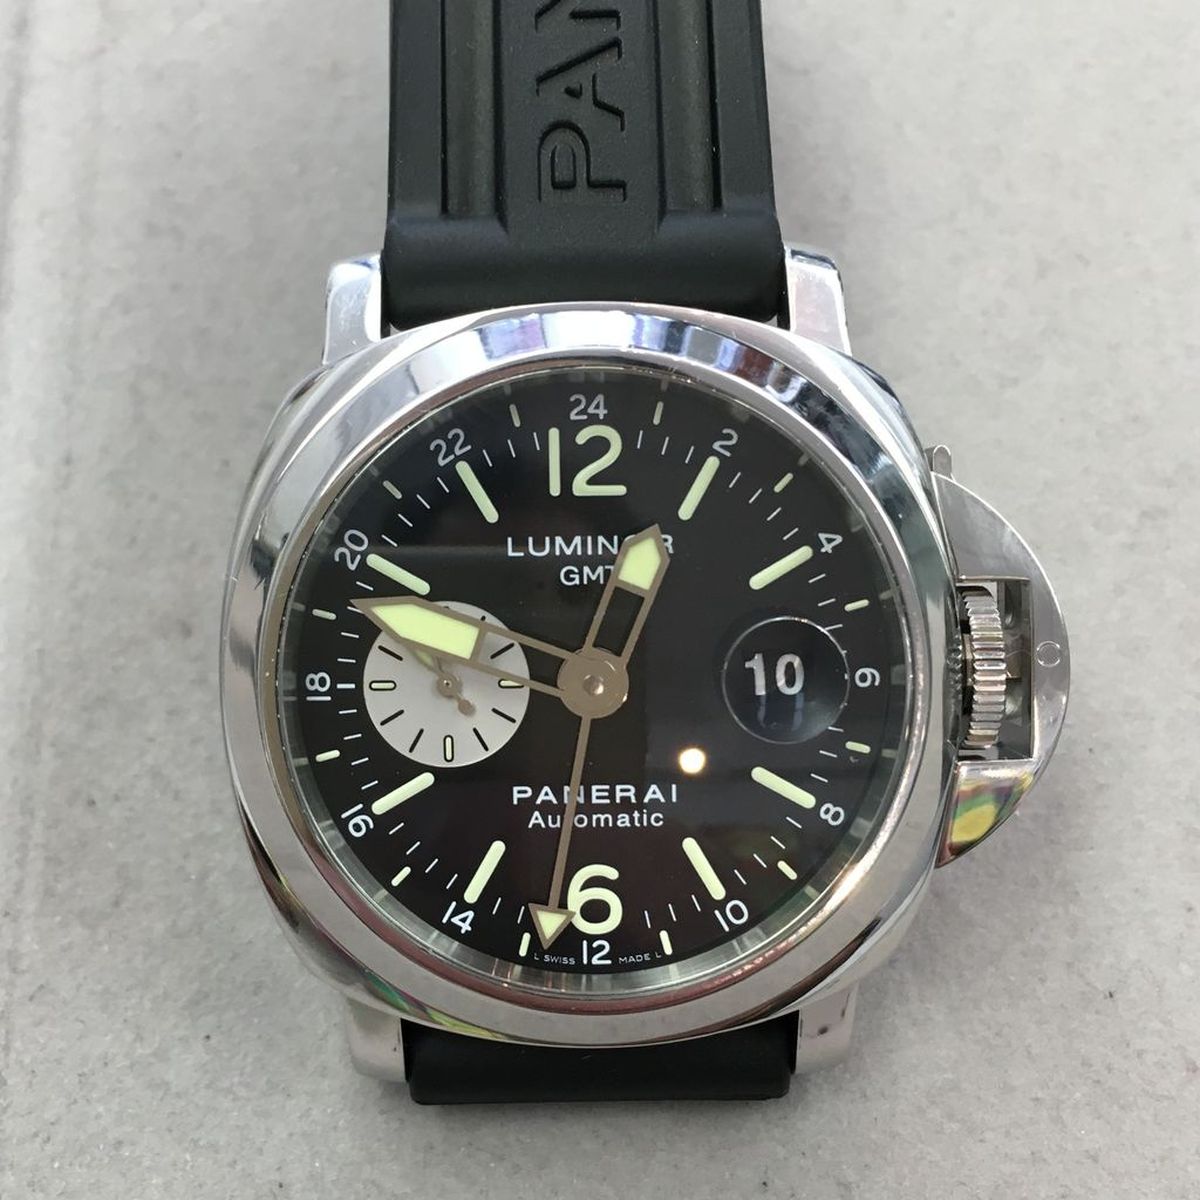 Panerai Watches - Why Everyone Wants One